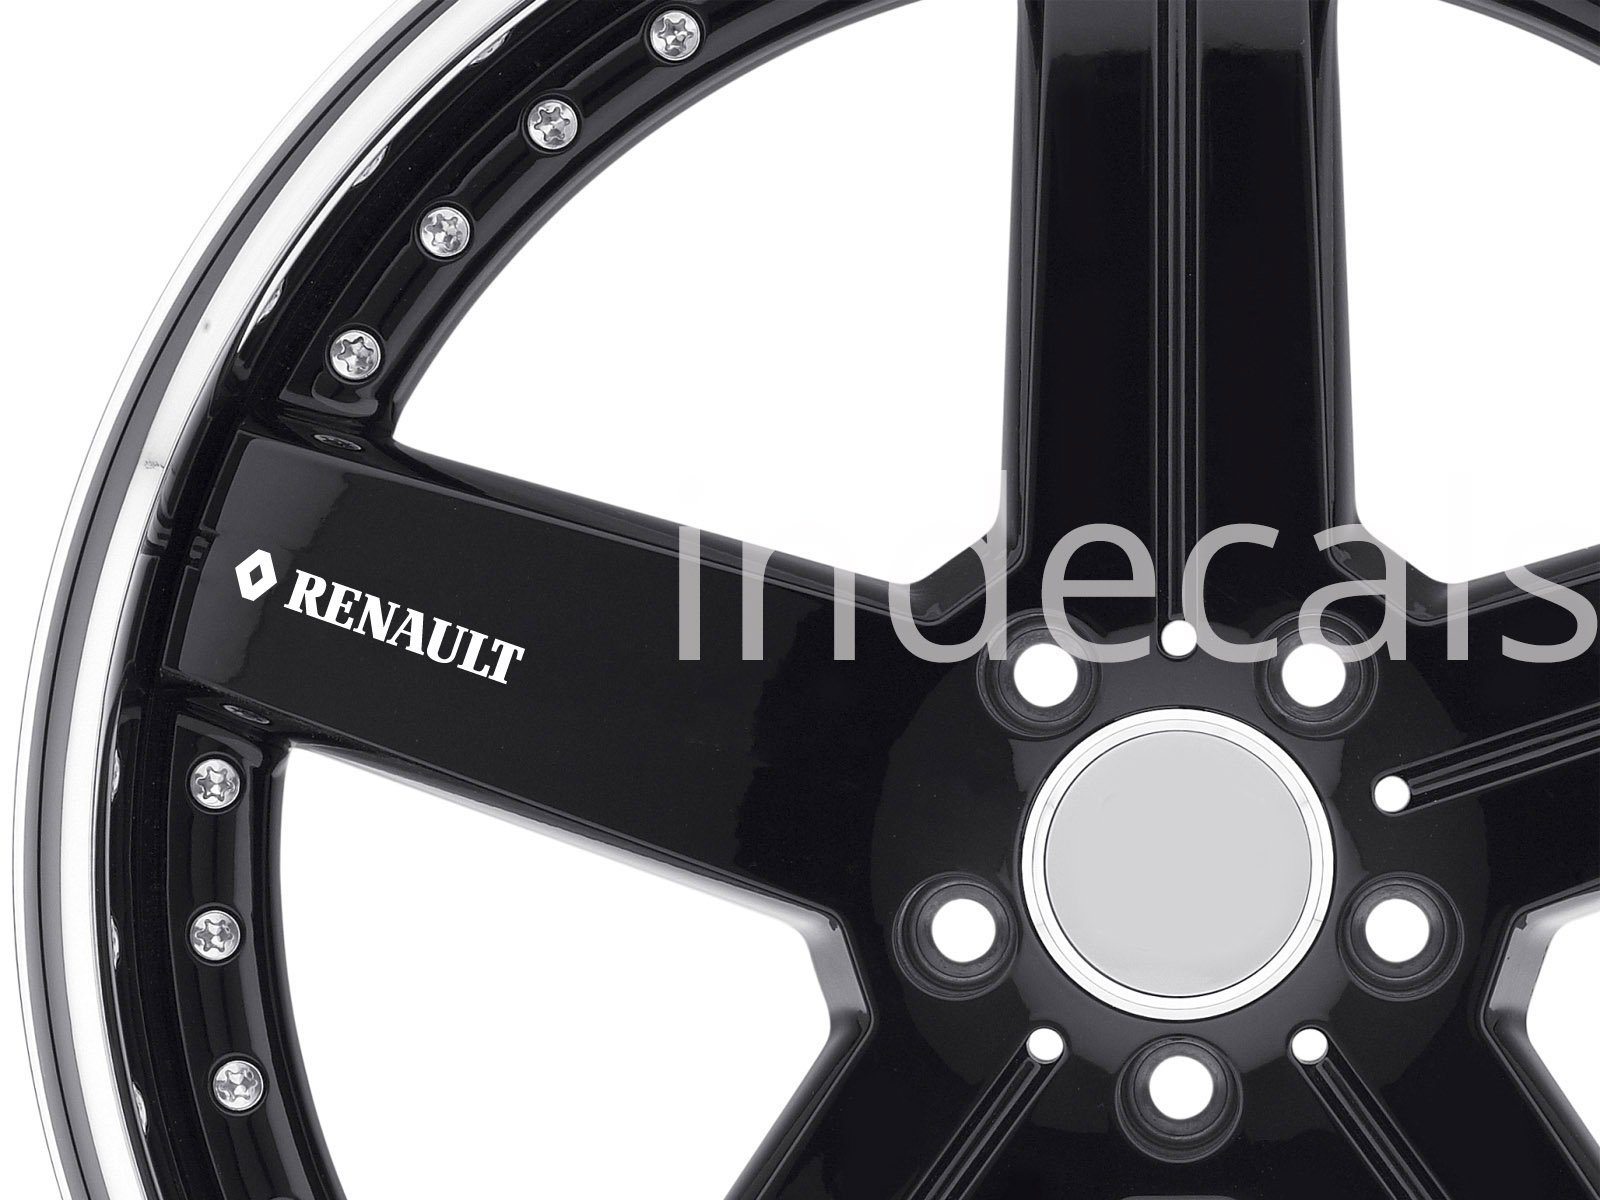 6 x Renault Stickers for Wheels - White